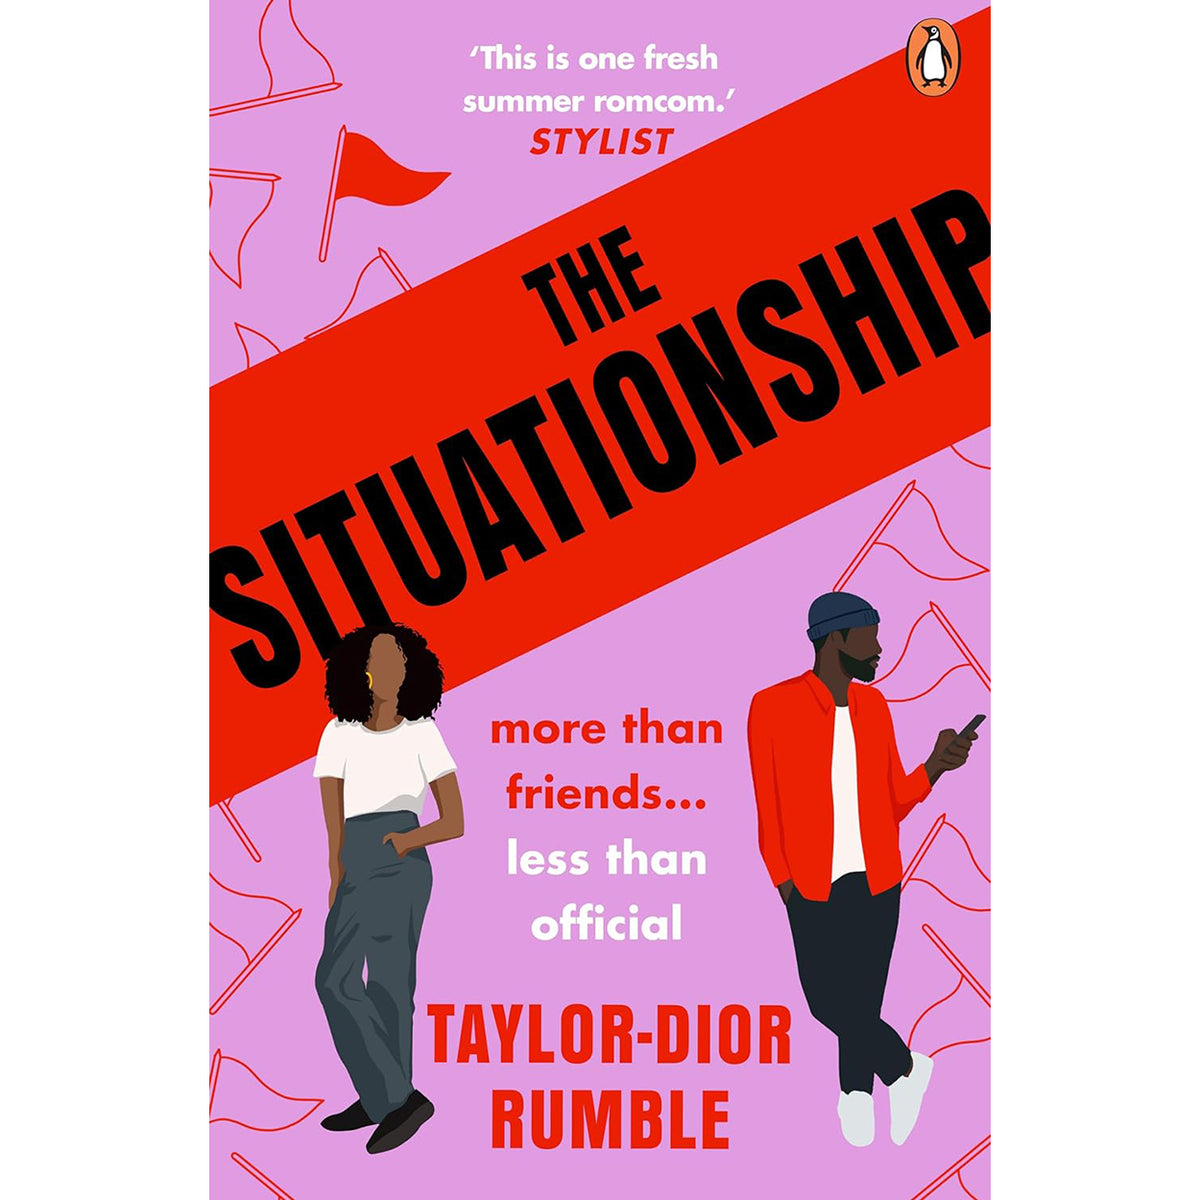 The Situationship Front Cover (Paperback)